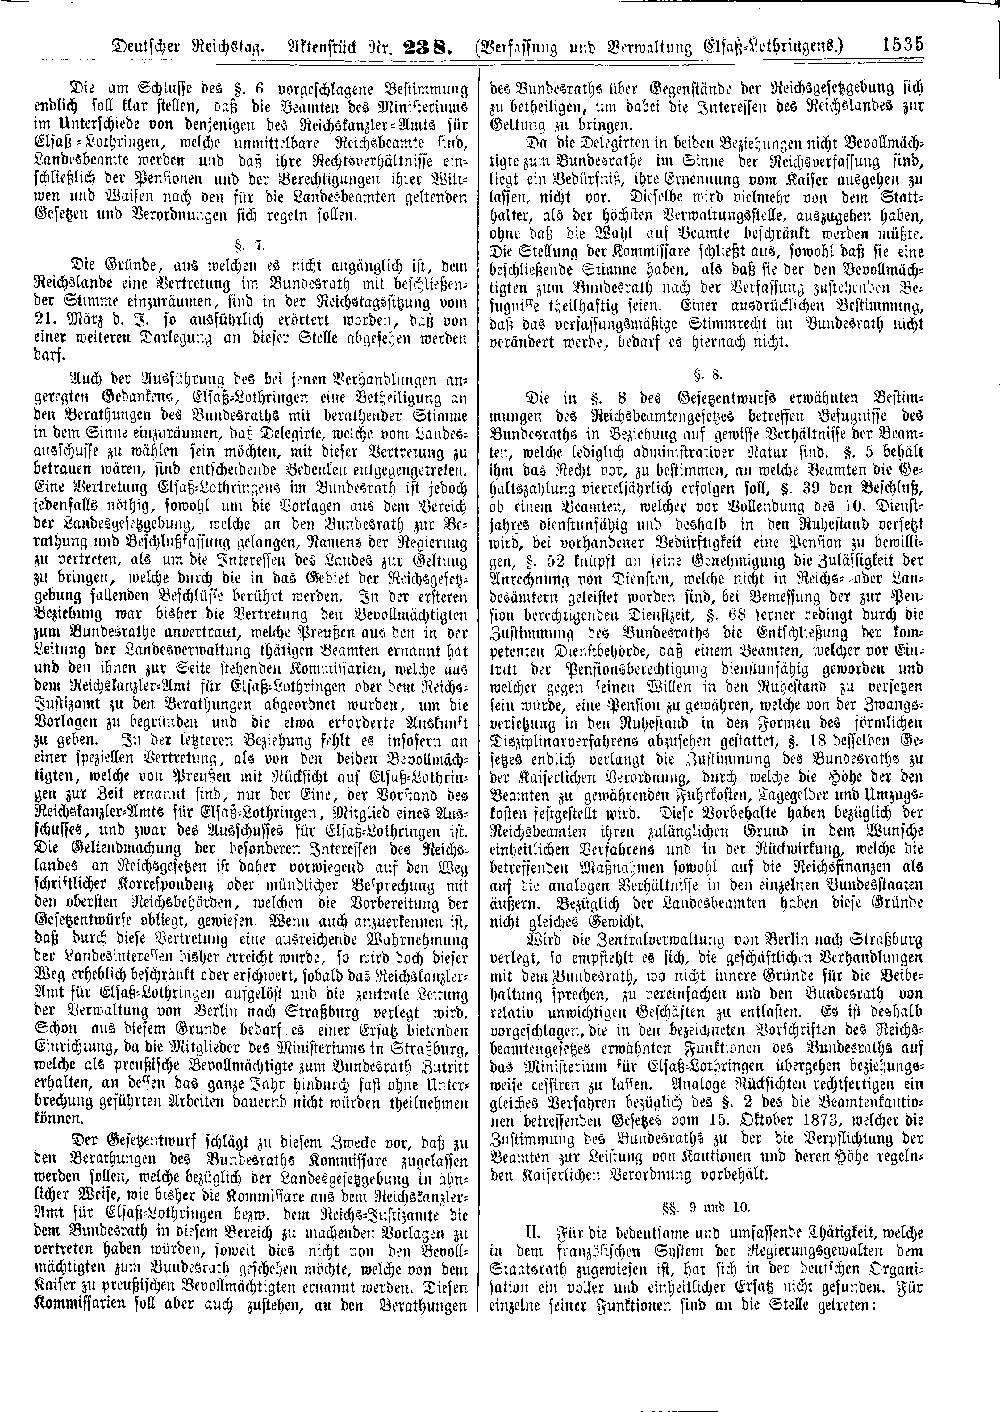 Scan of page 1535